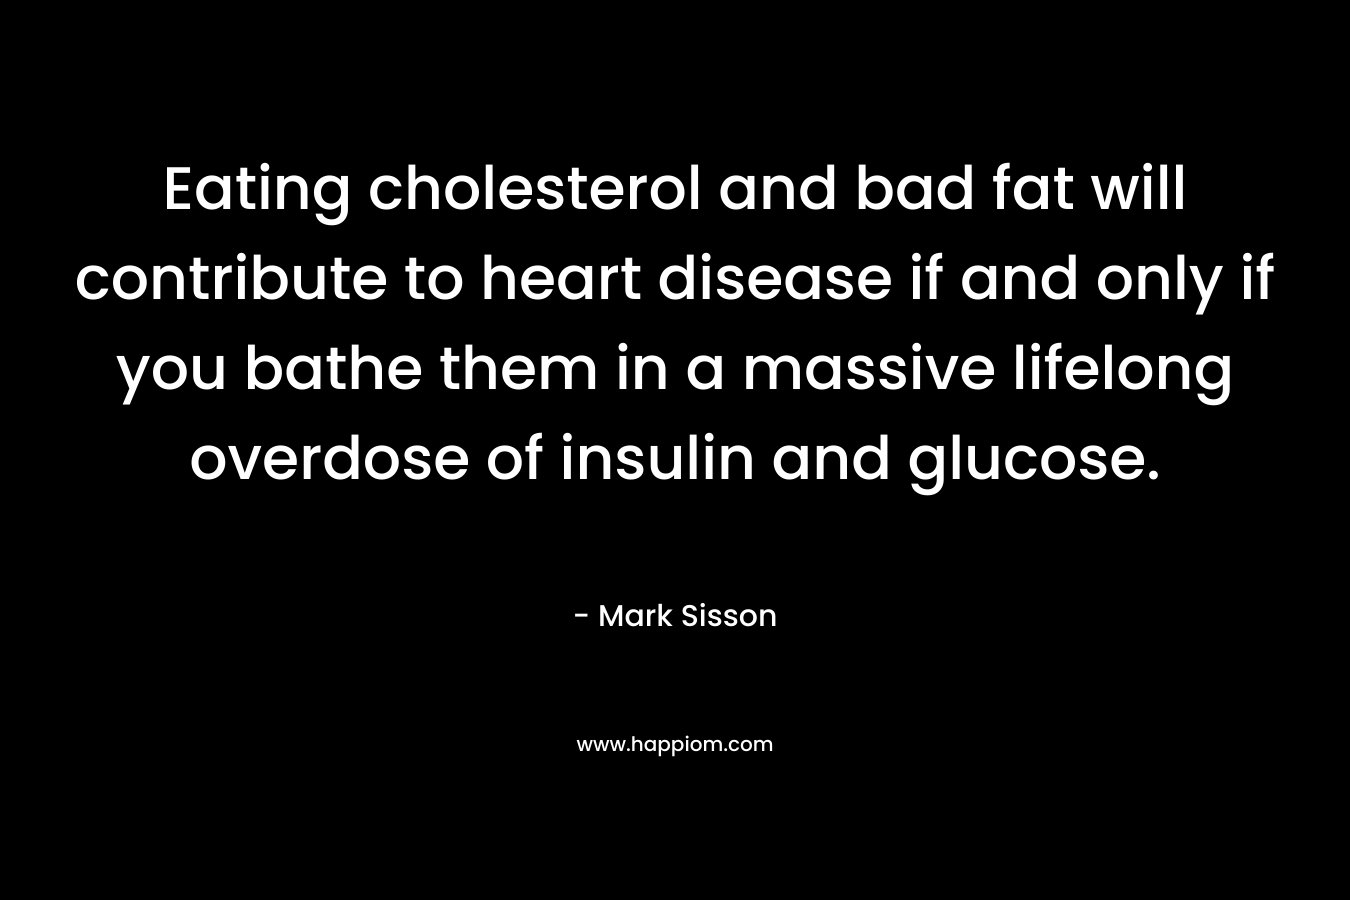 Eating cholesterol and bad fat will contribute to heart disease if and only if you bathe them in a massive lifelong overdose of insulin and glucose. – Mark Sisson